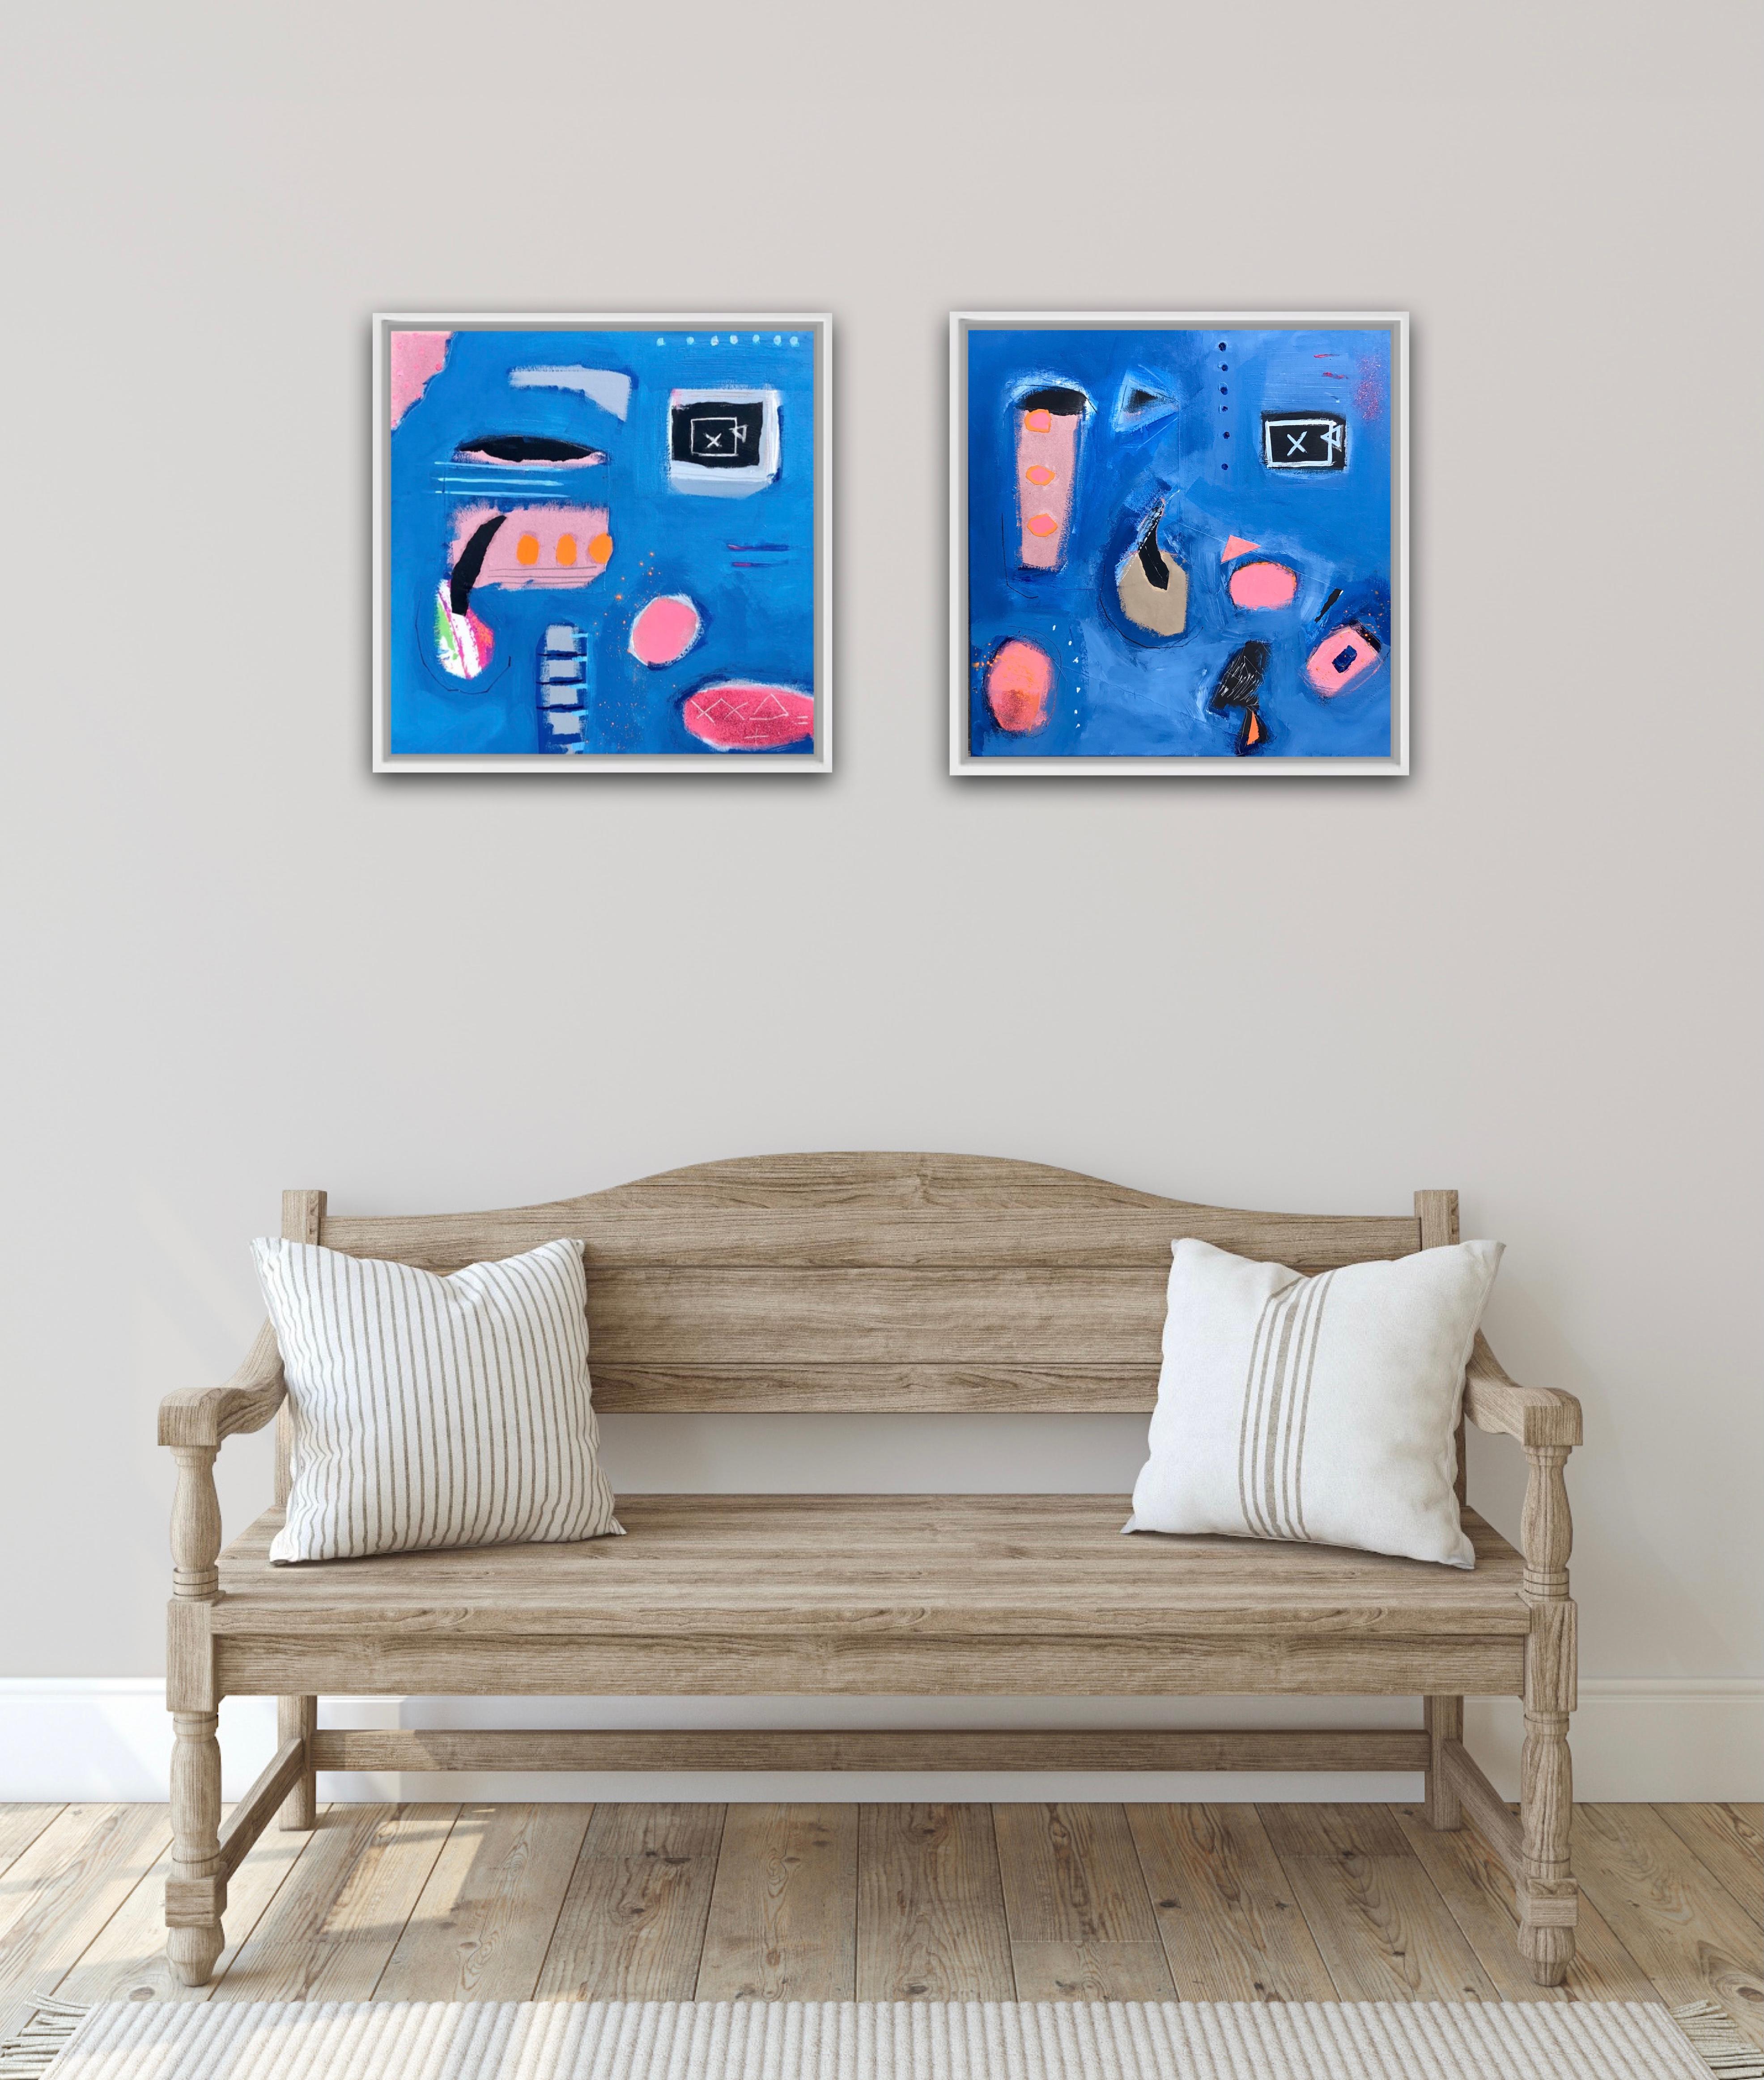 Cotton Candy and Wild swimming Diptych

Overall Size cm : H100 x W100

Maggie LaPorte Banks. Cotton Candy. [2021]
original
Acrylic on canvas, collage, and pigment.
Image size: H:50 cm x W:50 cm
Complete Size of Unframed Work: H:50 cm x W:50 cm x